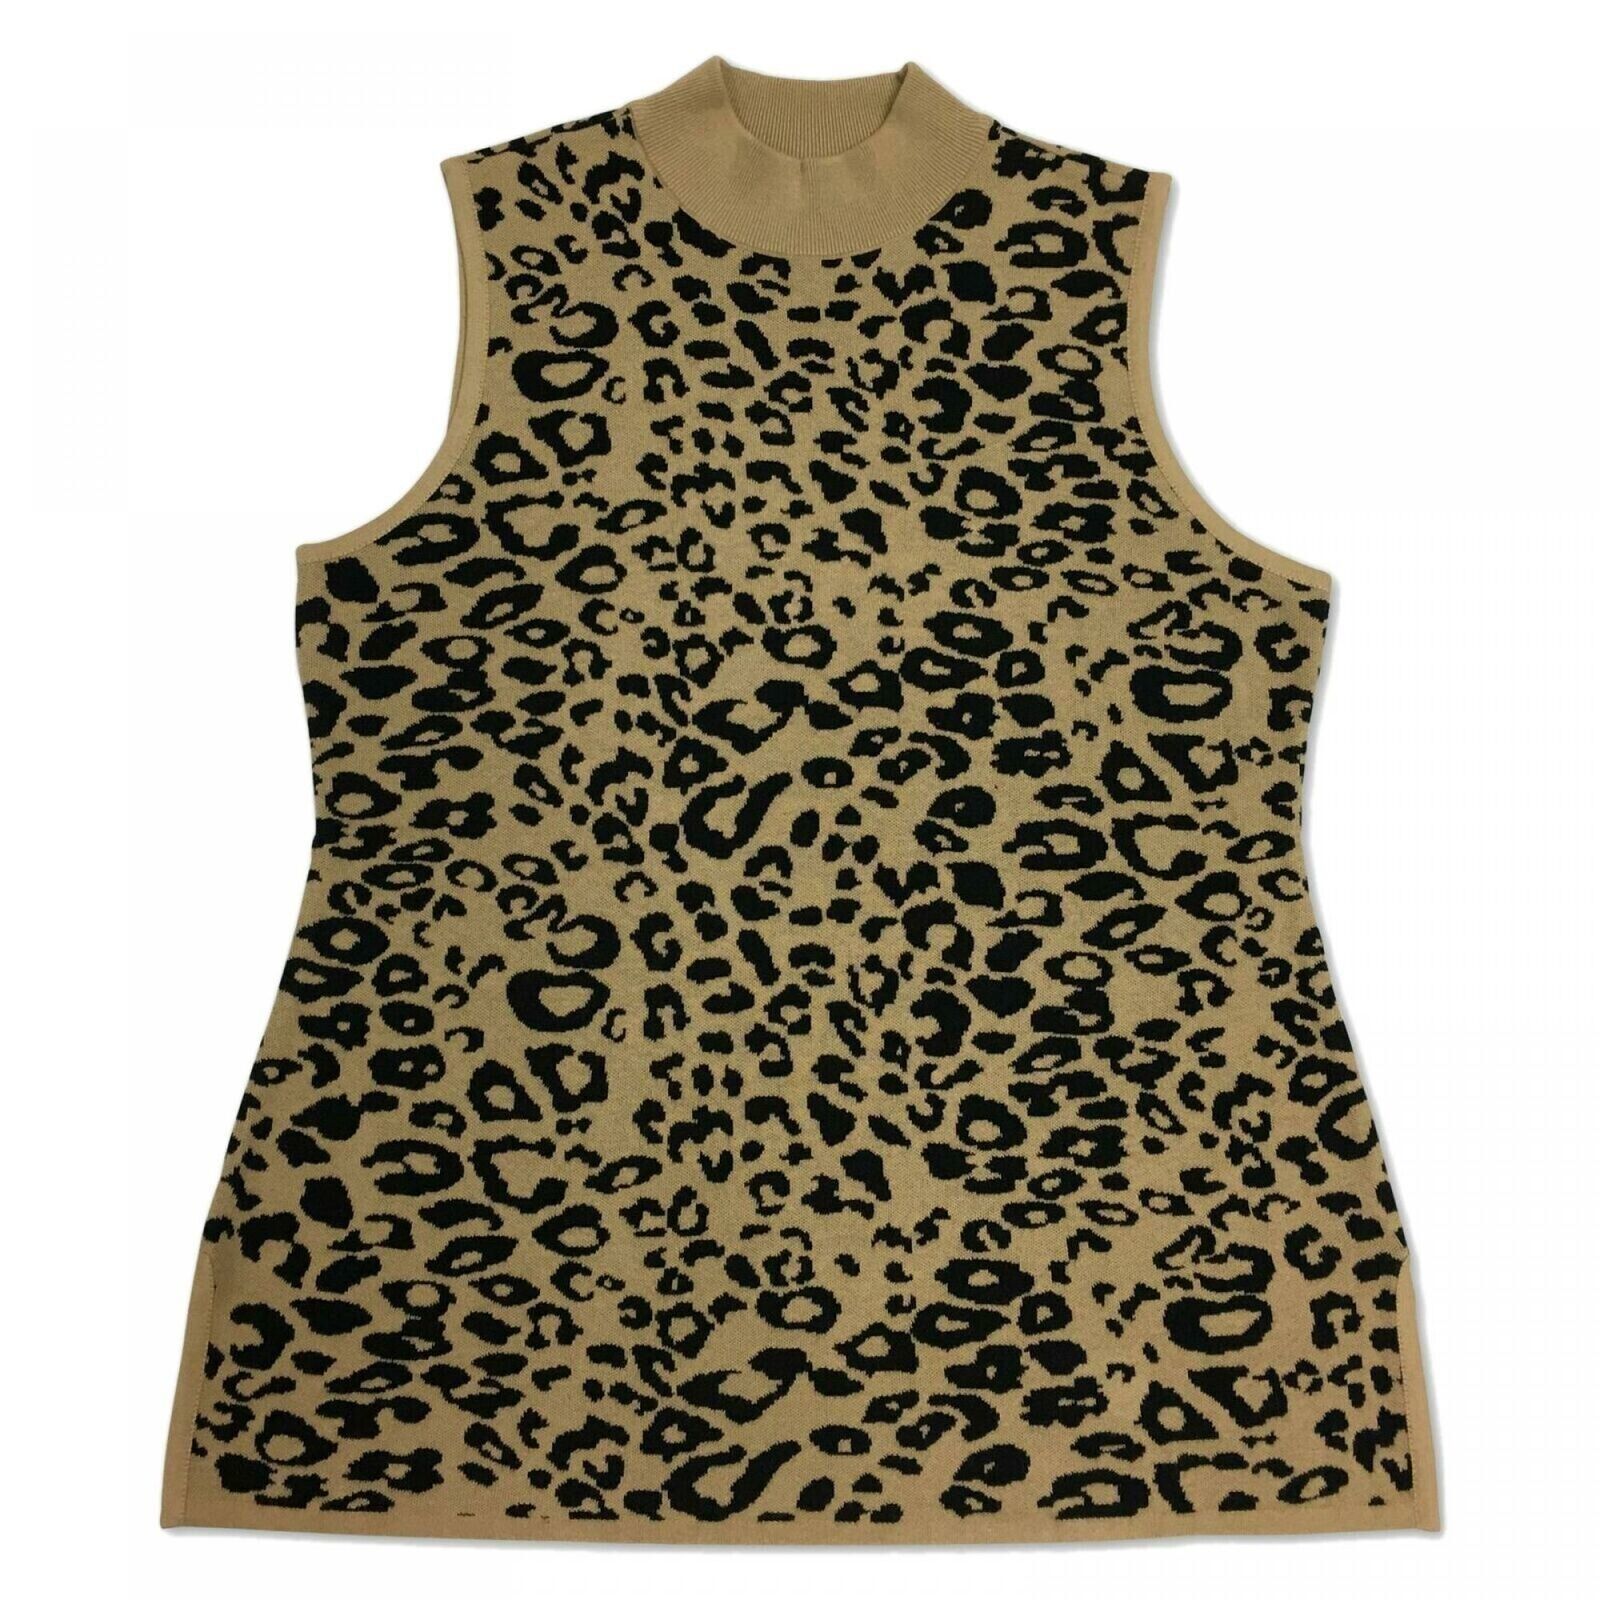 Primary image for JM Collection Womens Plus 3X Leopard Print Sleeveless Mock Neck Sweater NWT AU73